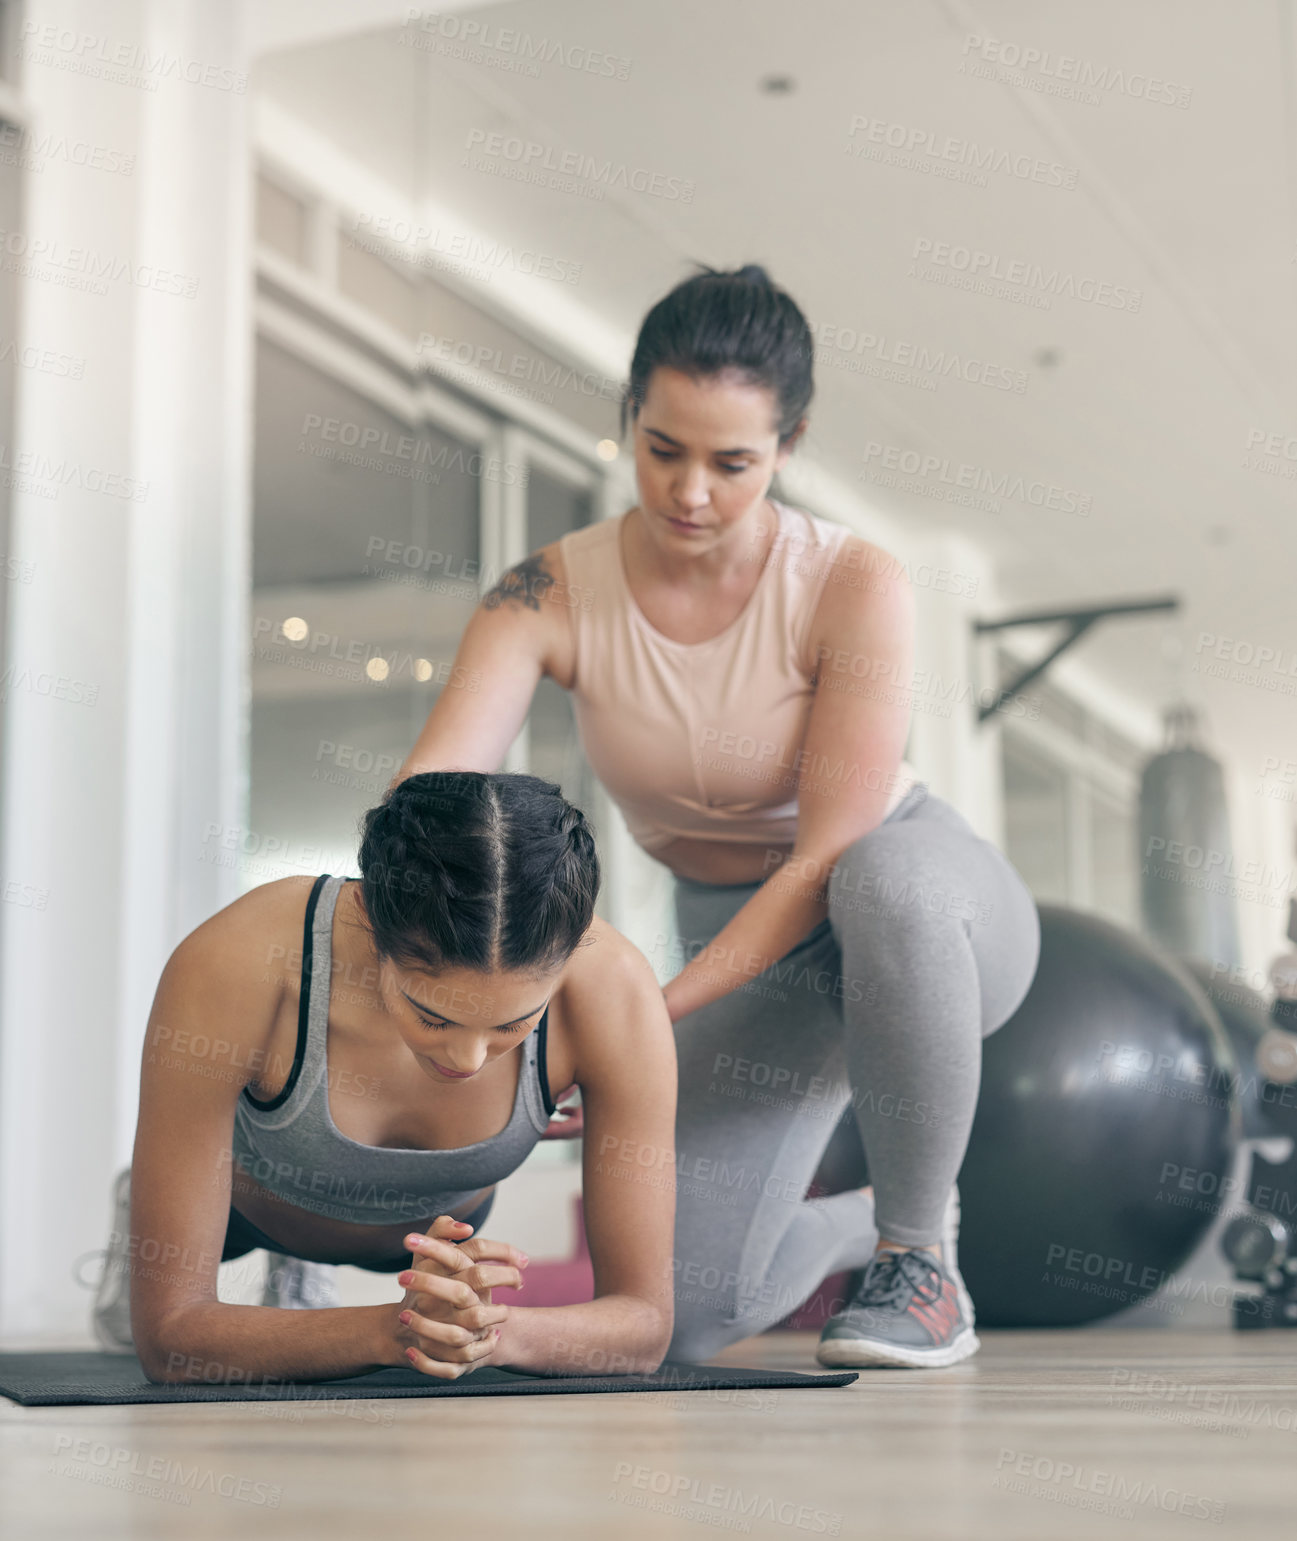 Buy stock photo Shot of a young woman working out with a personal trainer at the gym